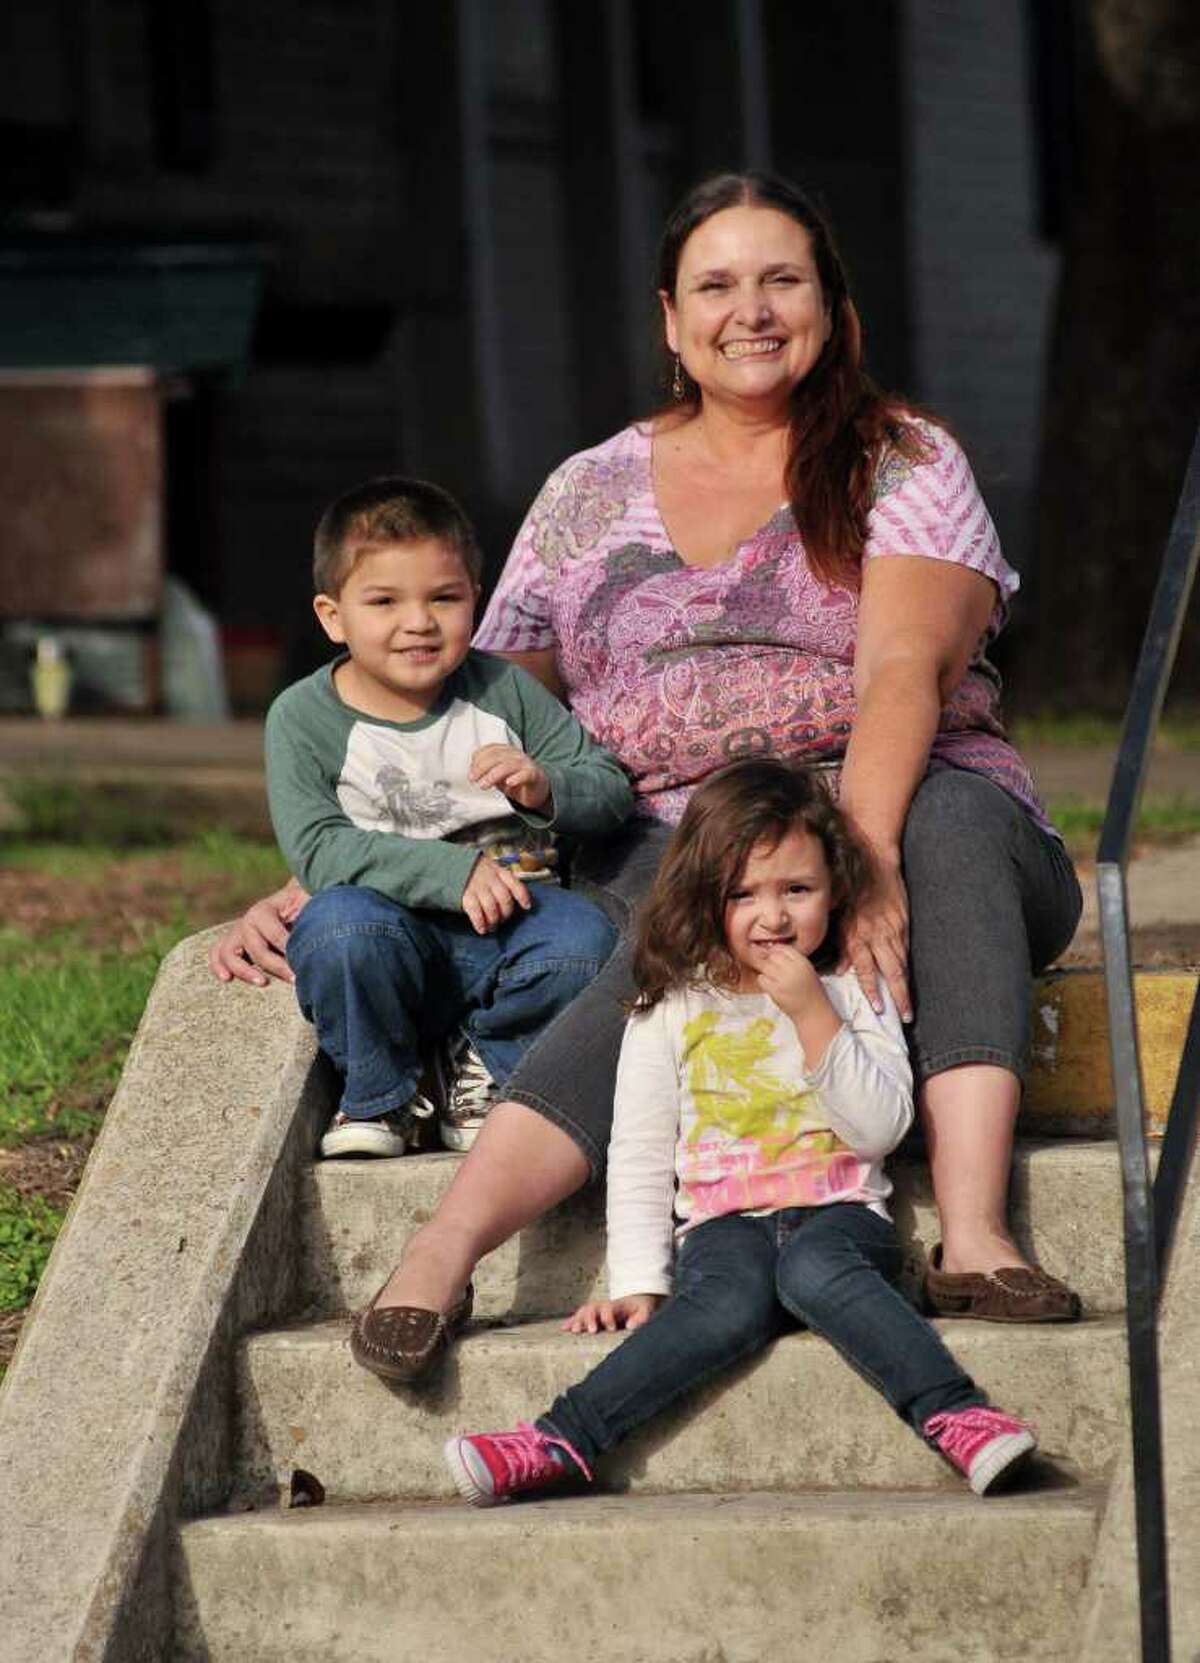 Mary DeHoyos and her son Nicholas and granddaughter Krista Sanchez. DeHoyos is received an email from the Patriots for Self-Deportation encouraging Americans to deport themselves if their ancestors entered the country illegally.